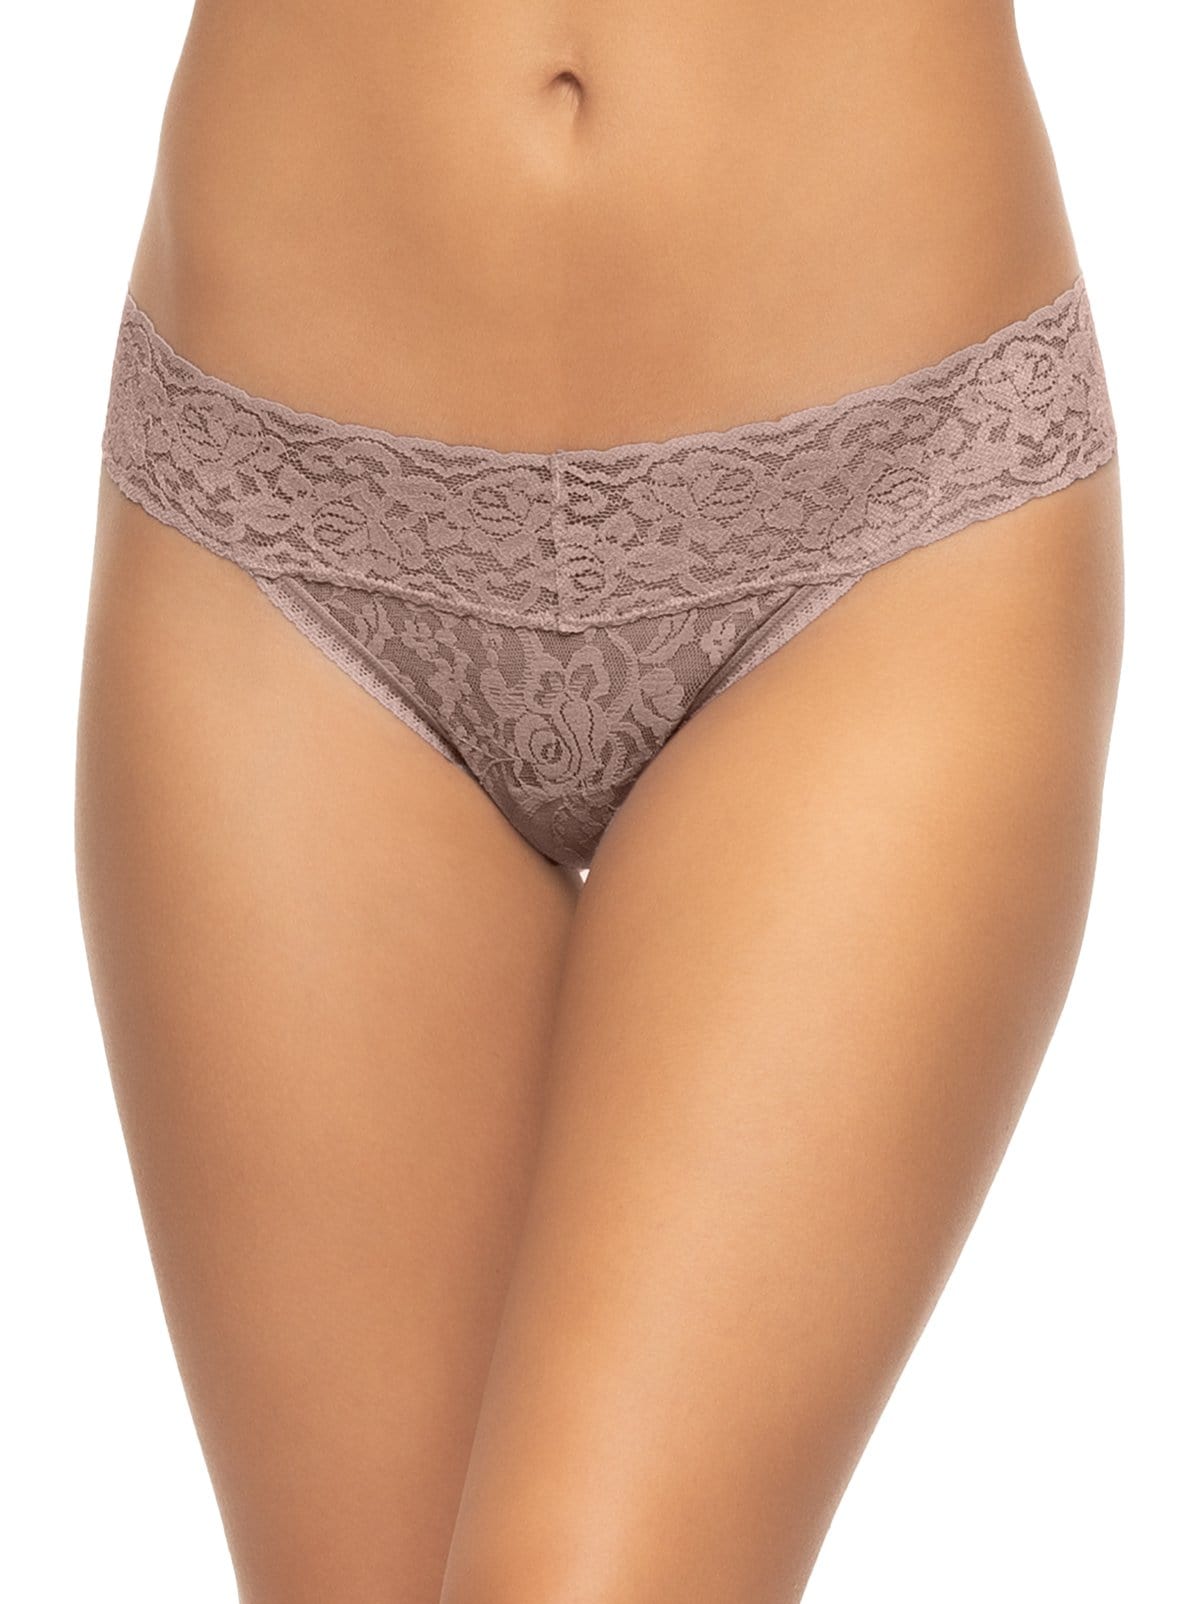 Felina Women's Stretchy Lace Low Rise Thong - Seamless Panties (6-pack)  (light Mist, S/m) : Target